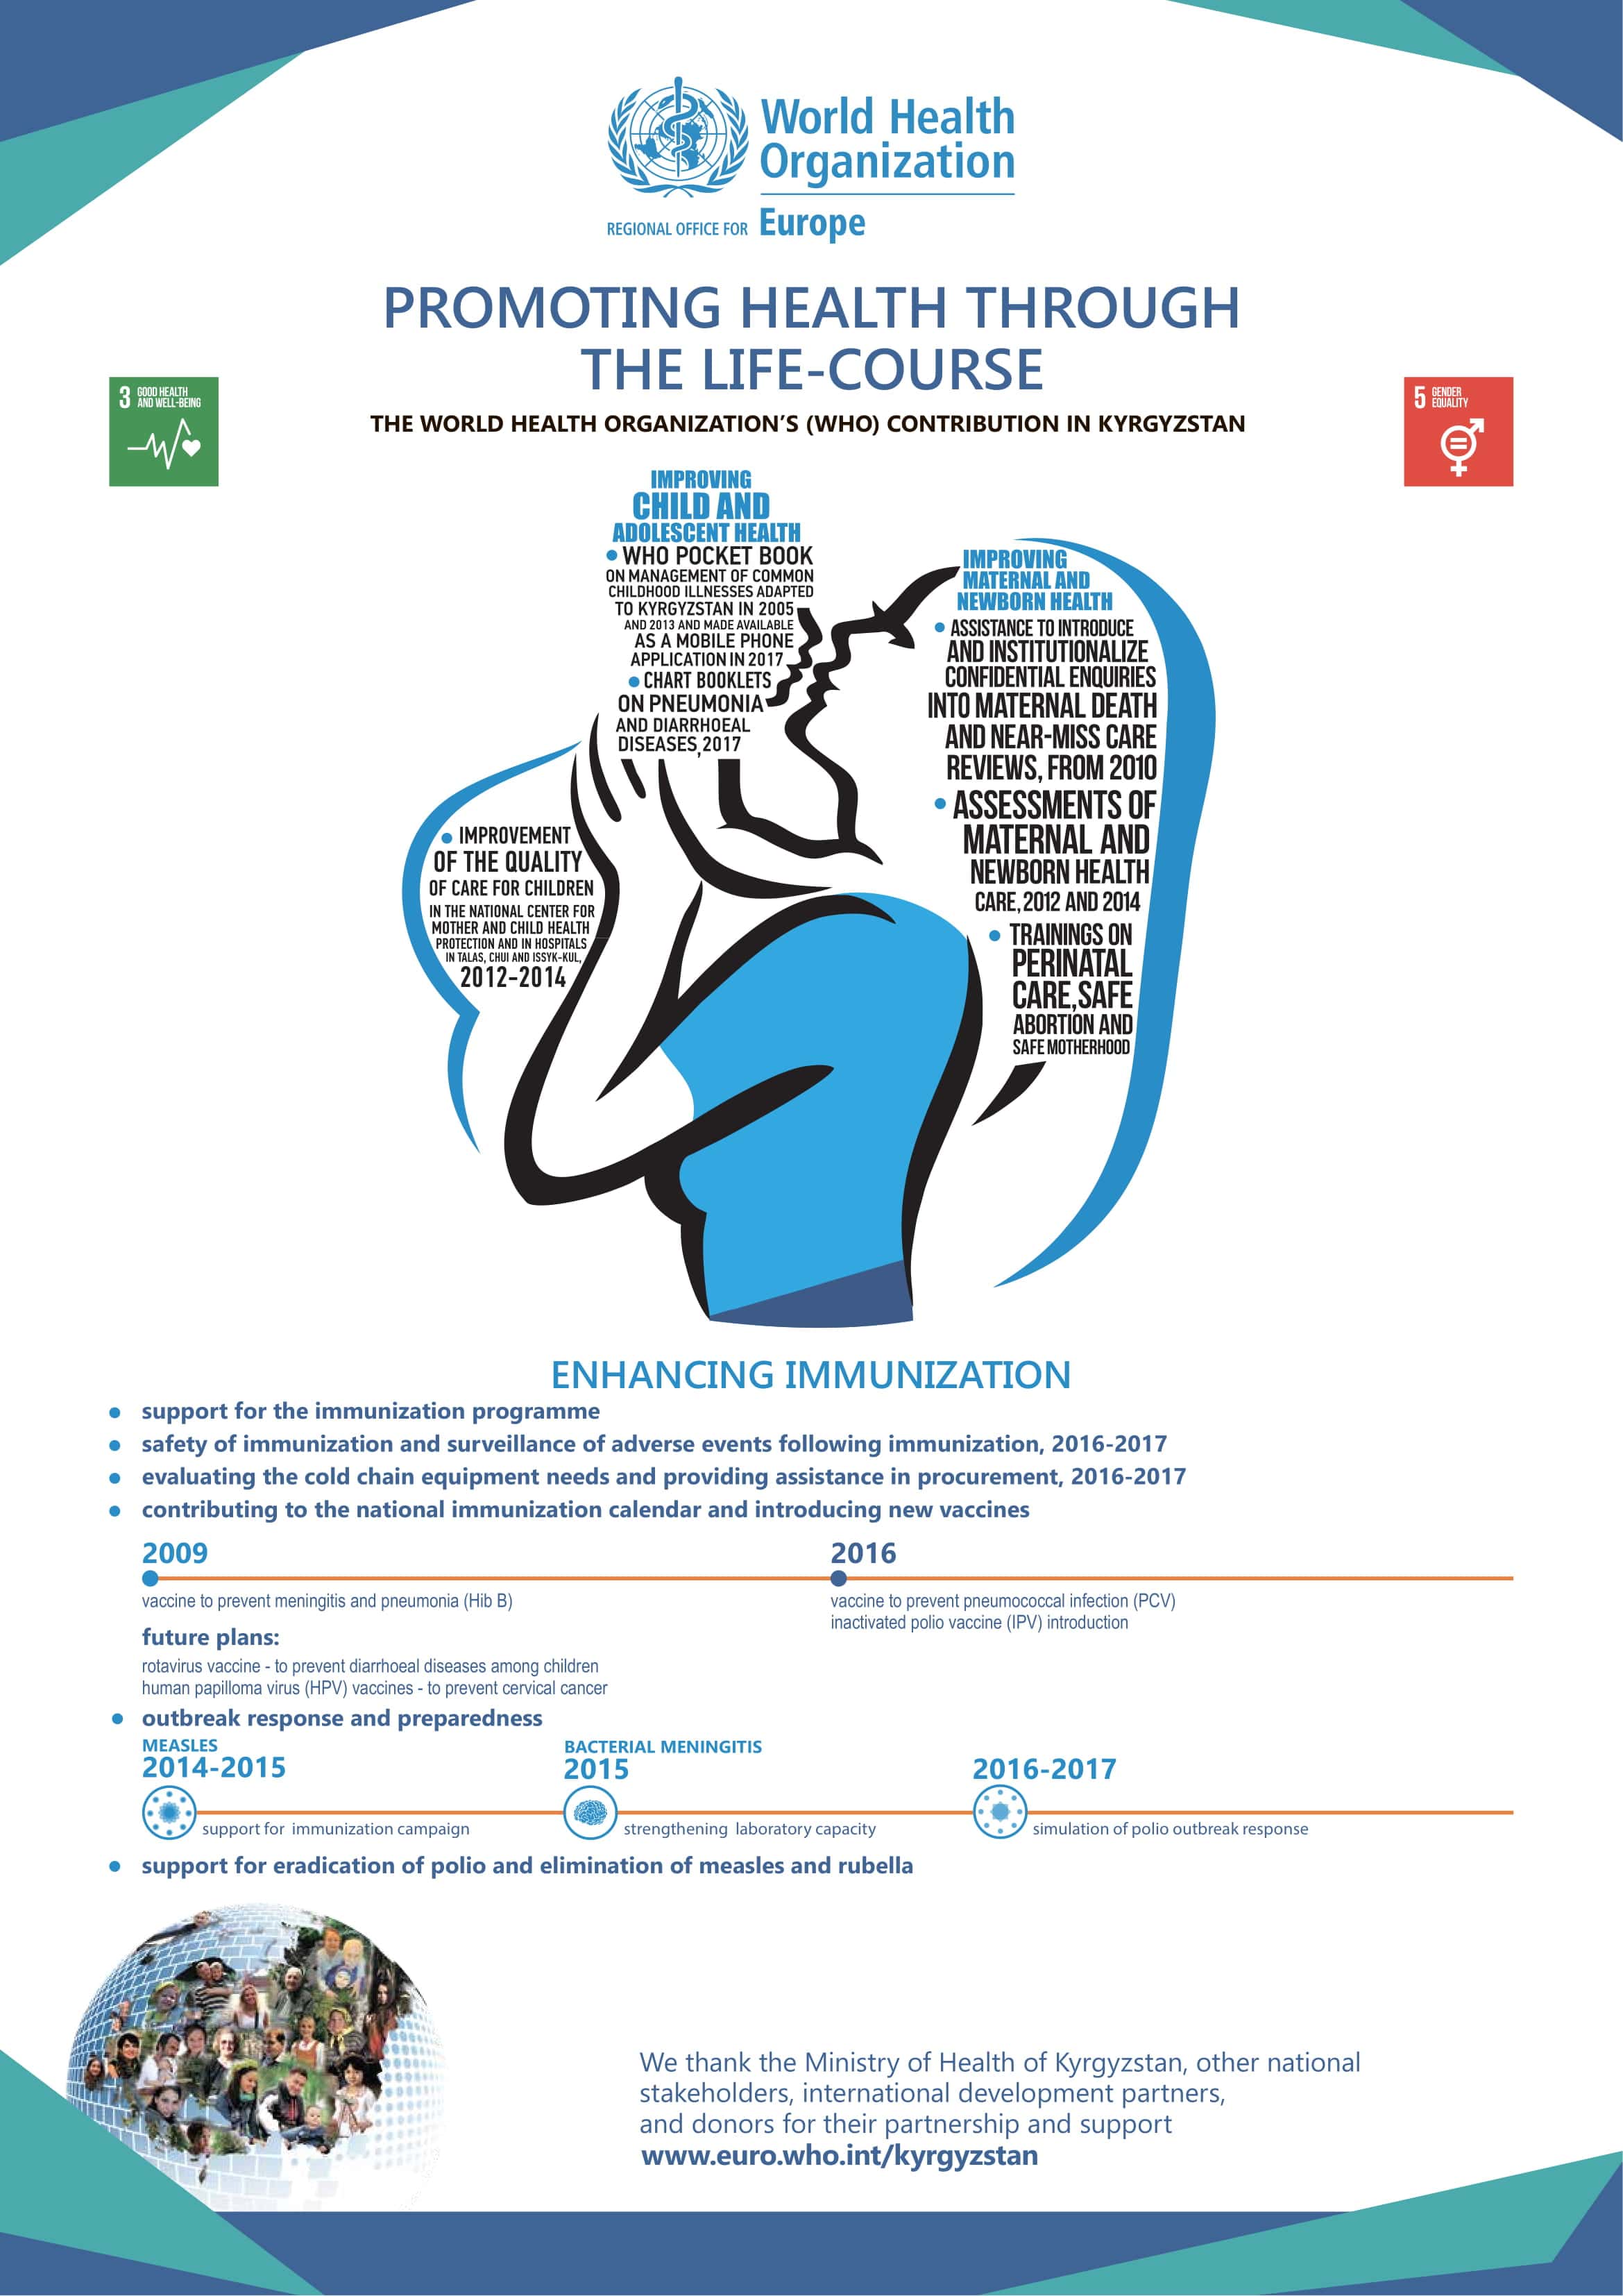 Promoting health through the life-course